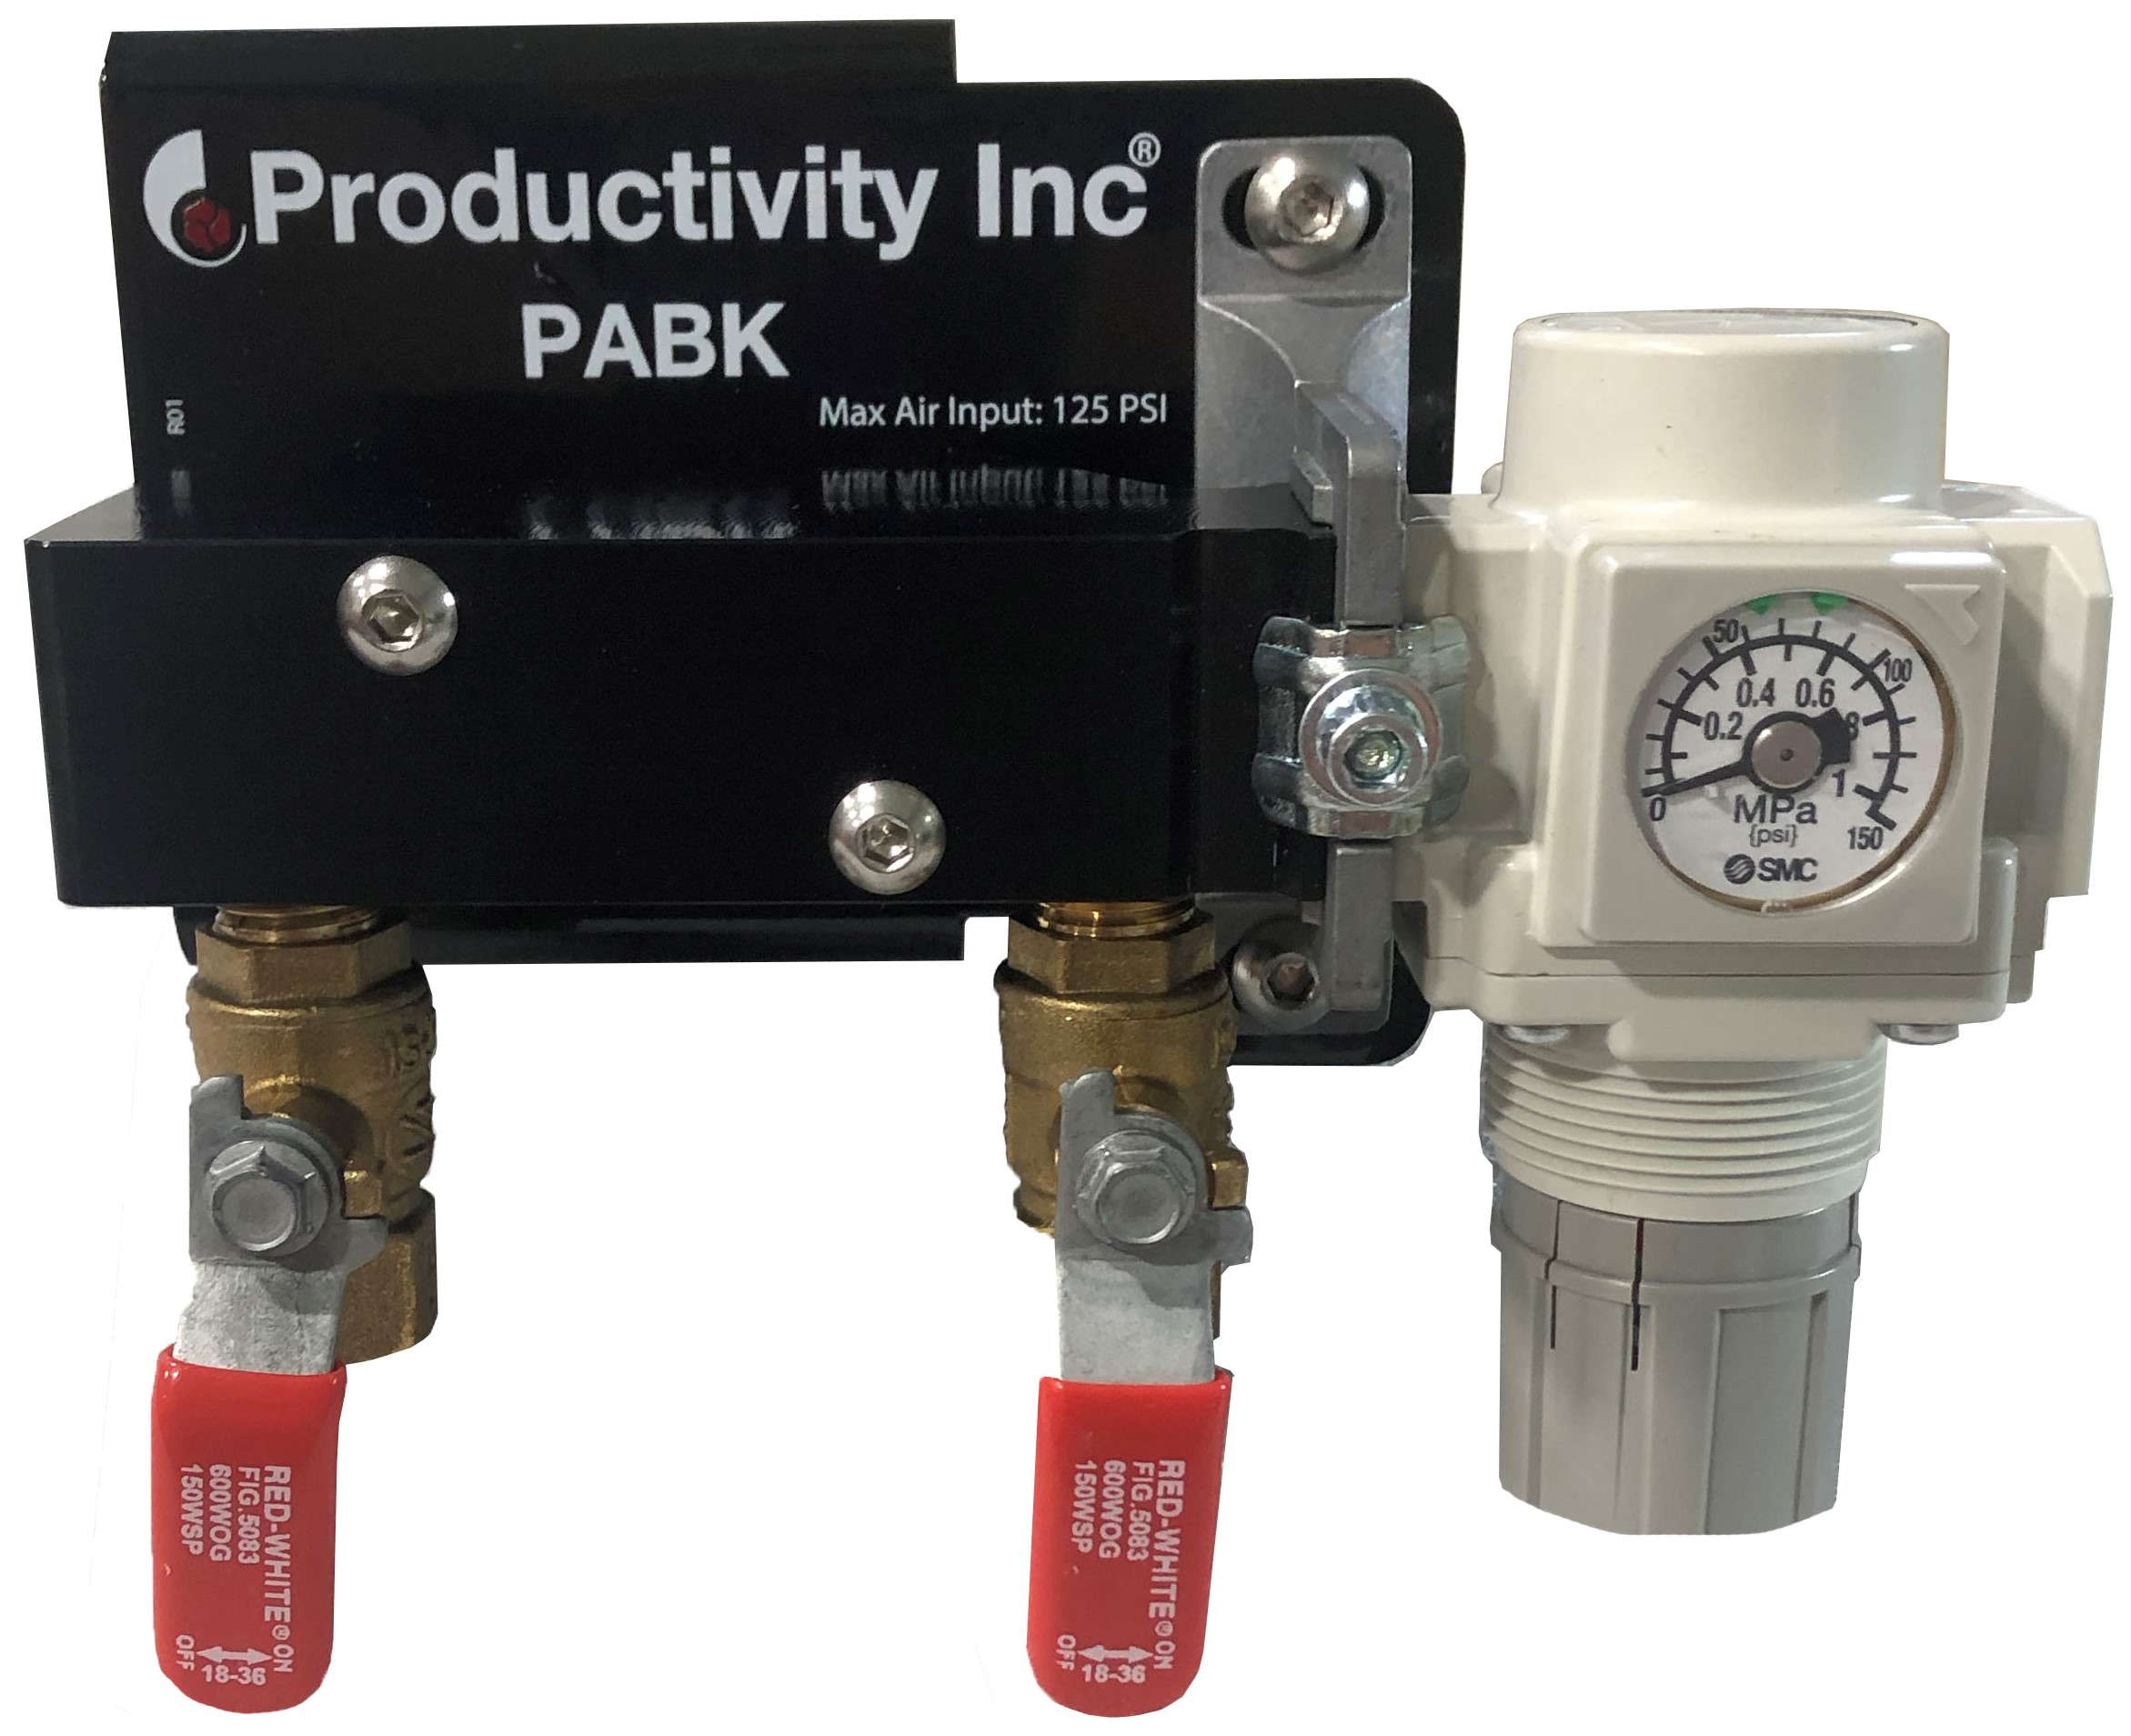 A Portable AirBlast Kit (PABK) from Productivity Inc. for machining dry. 